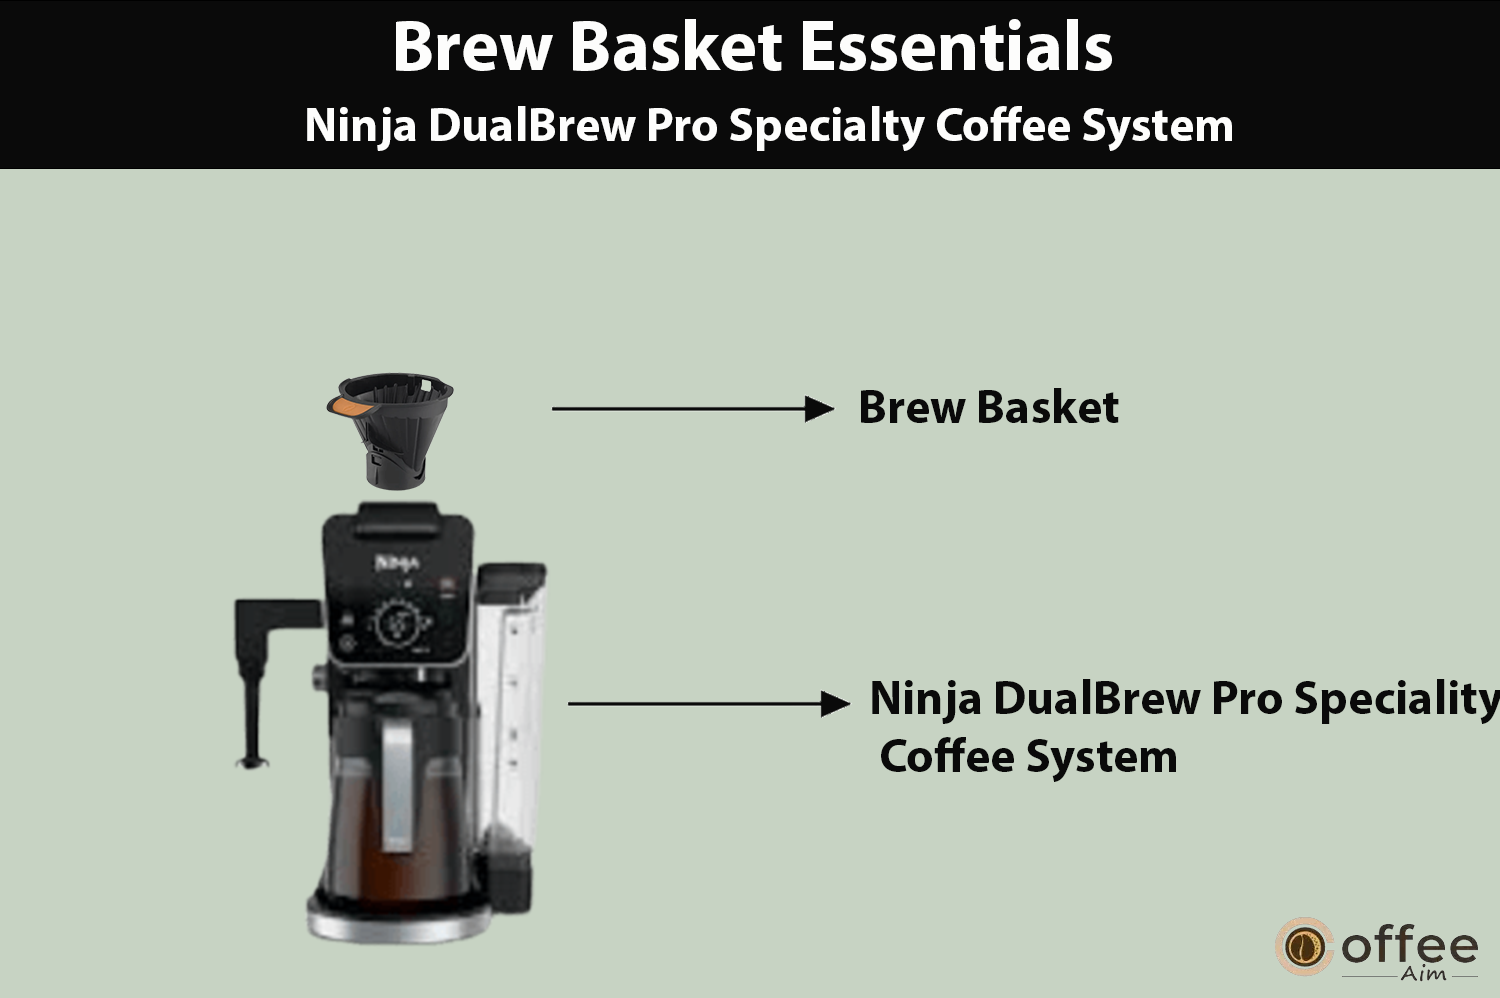 "This image depicts the insertion of the Brew Basket in the Ninja DualBrew Pro Specialty Coffee System, as detailed in the article 'How to Use Ninja DualBrew Pro Specialty Coffee System, Compatible with K-Cup Pods, and 12-Cup Drip Coffee Maker.'"